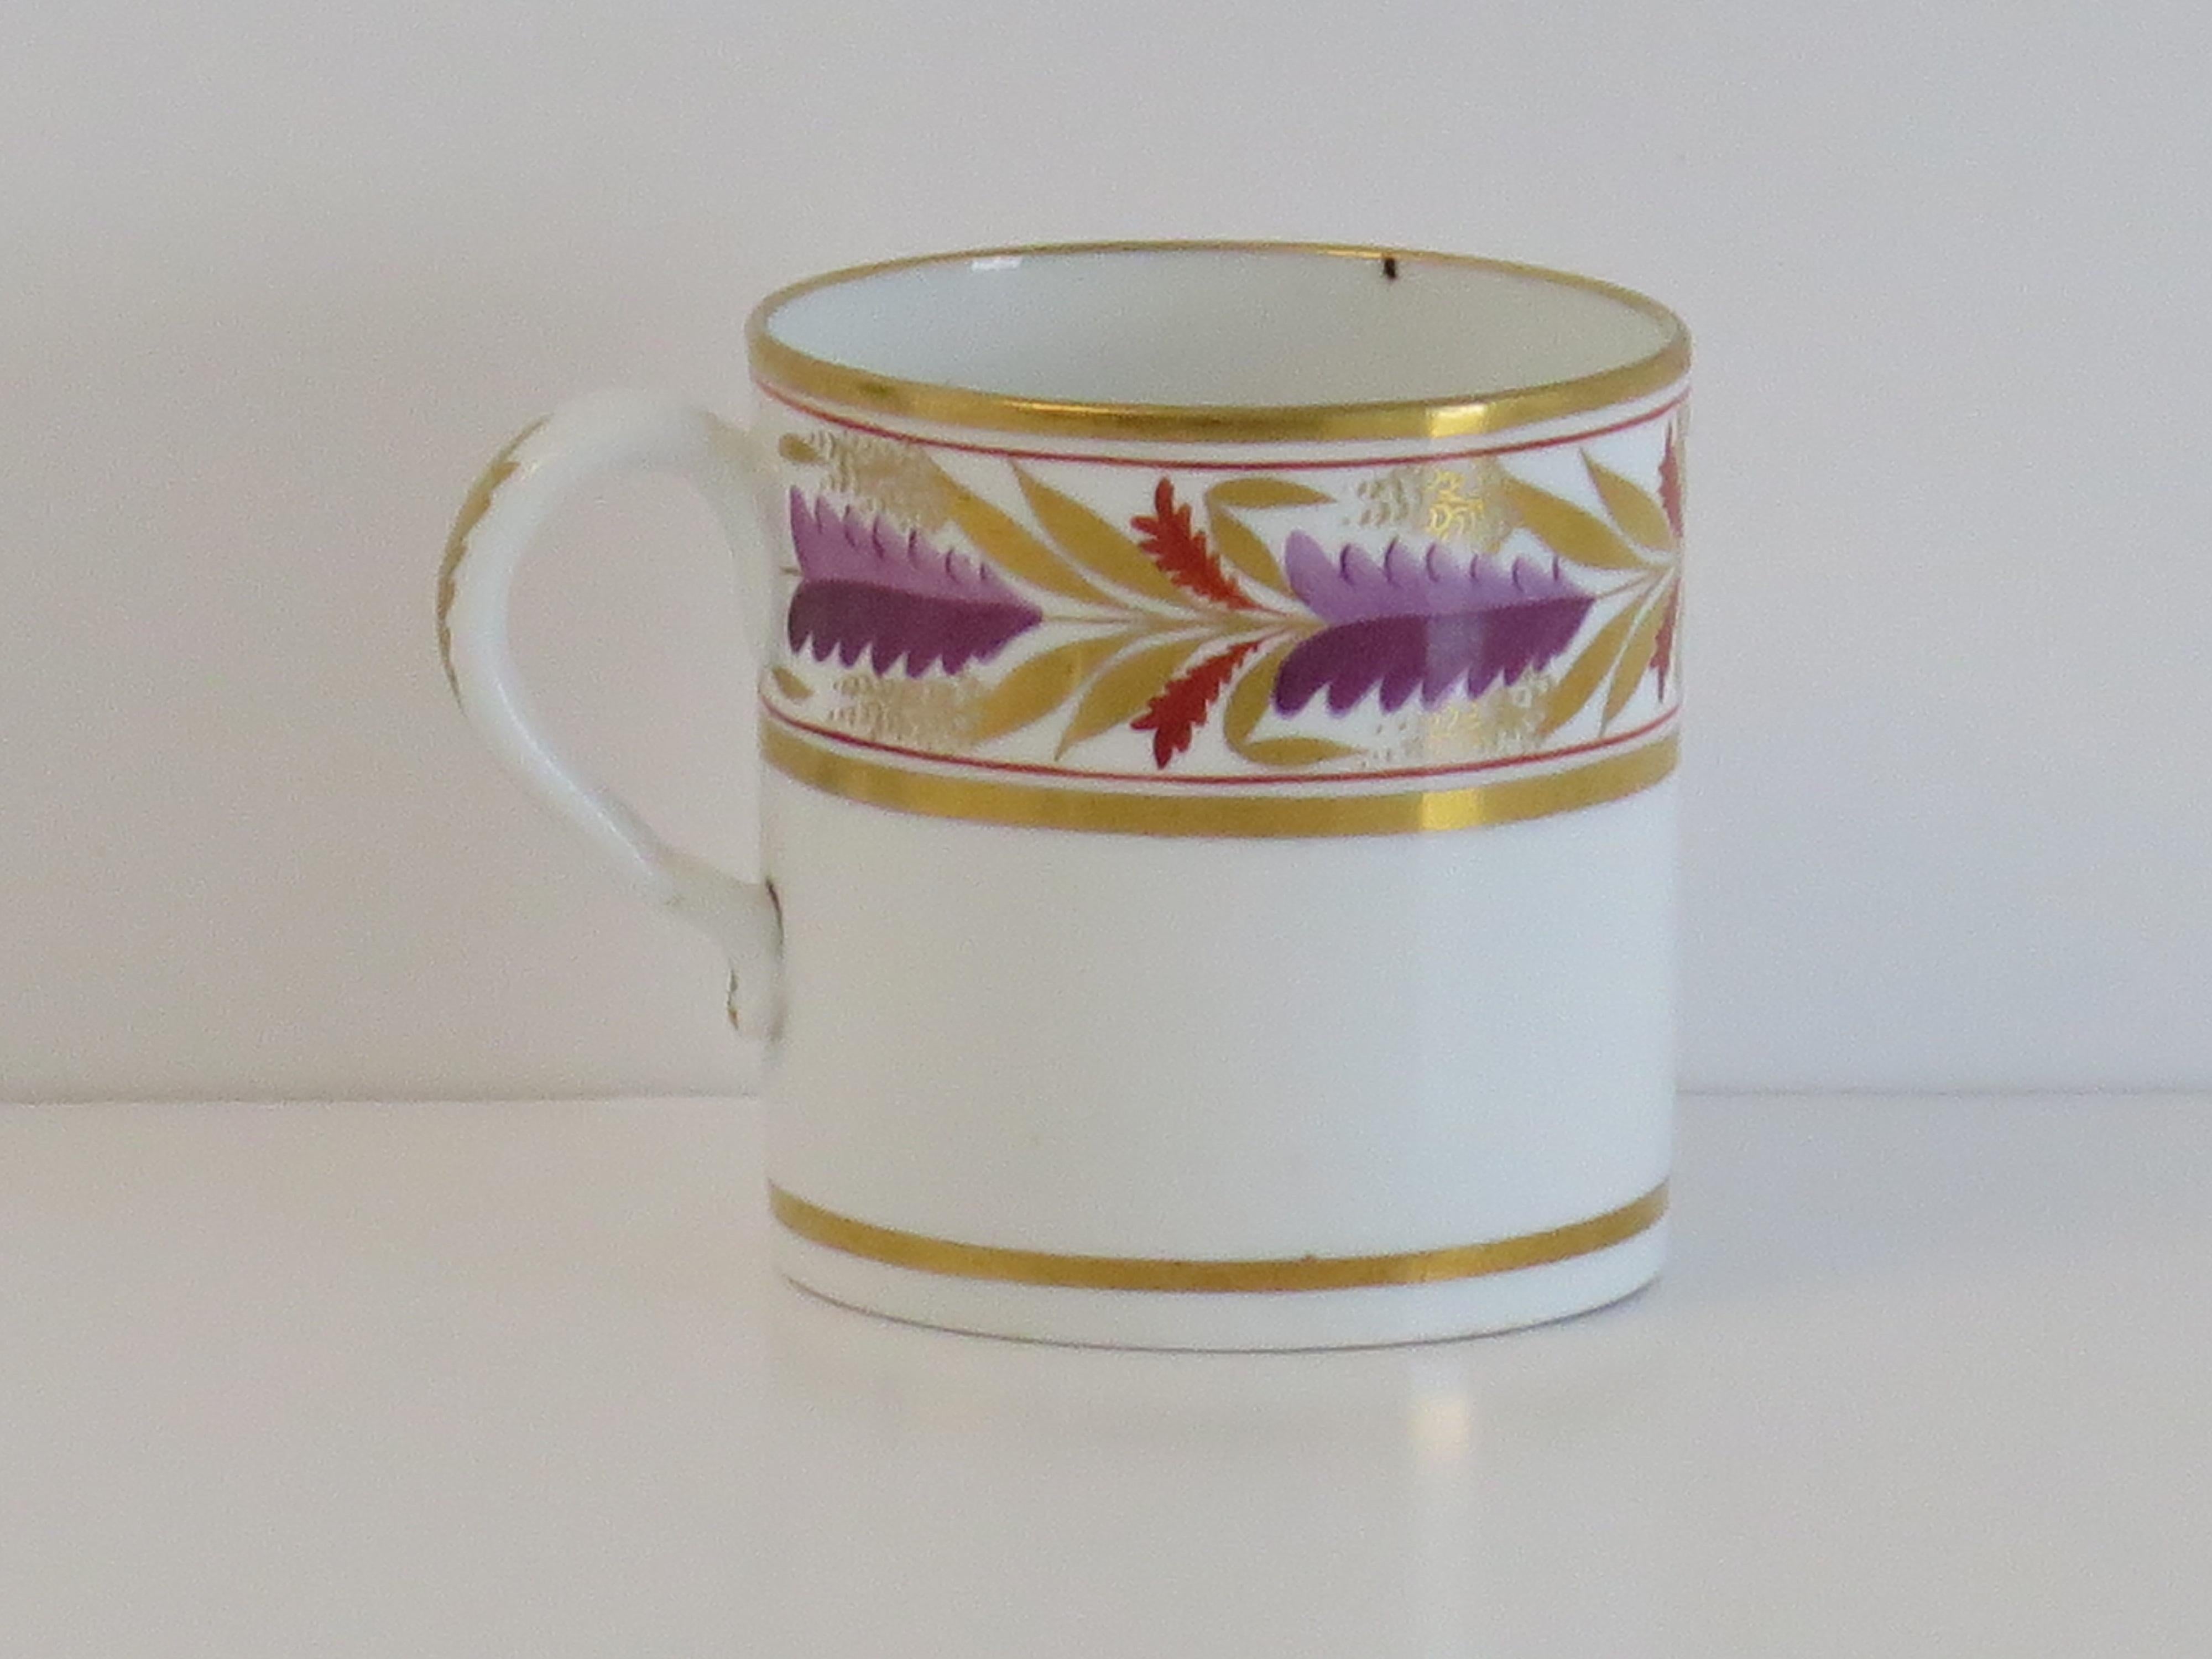 This is a very good quality porcelain coffee can by Spode of Staffordshire, England, made during the very early 19th century, George 111rd period, circa 1805.

The coffee can is nominally parallel, with a loop handle having one lower kink,